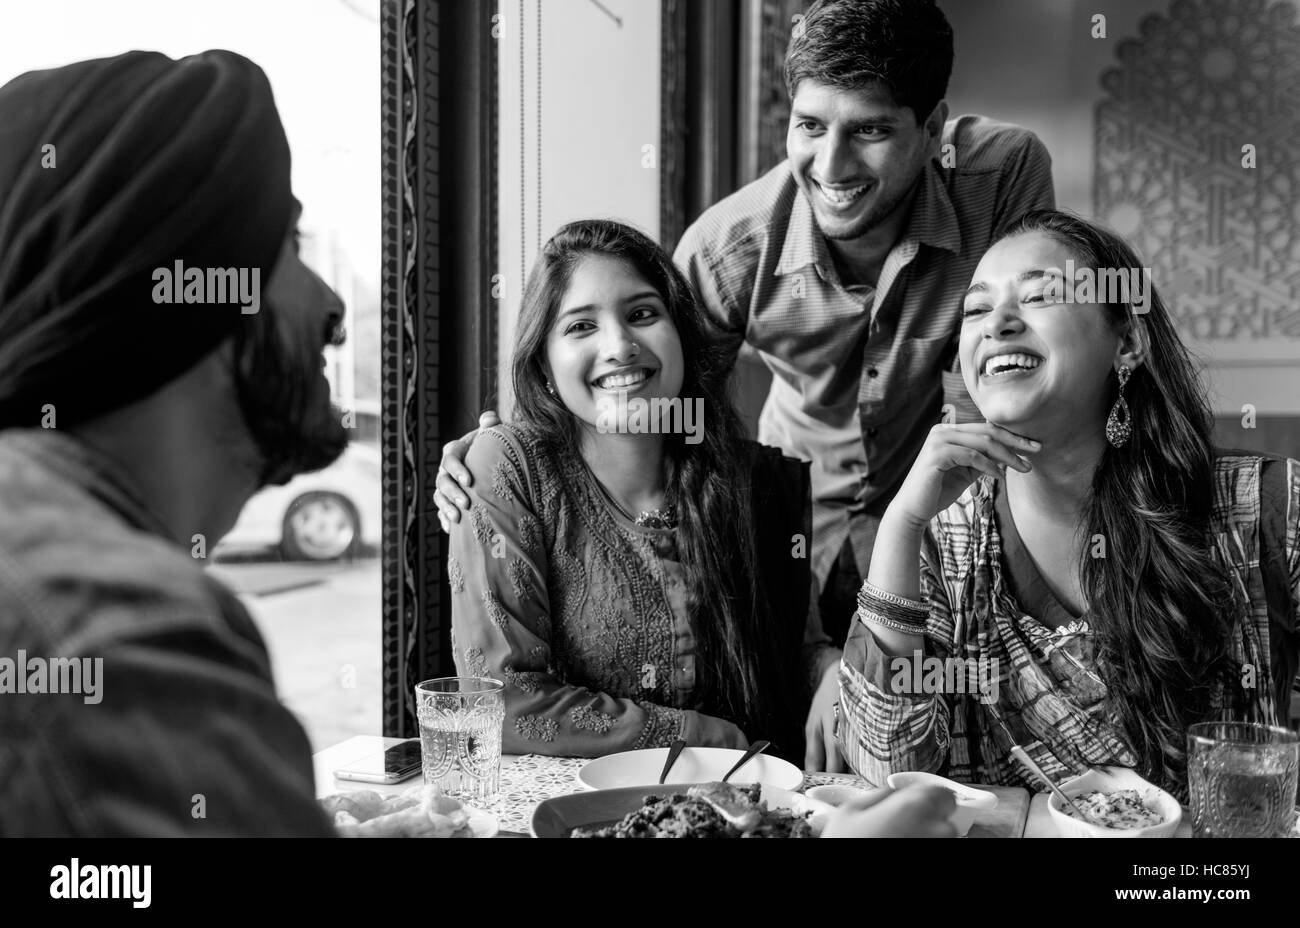 Indian Community Eating Restaurant Dining Concept Stock Photo